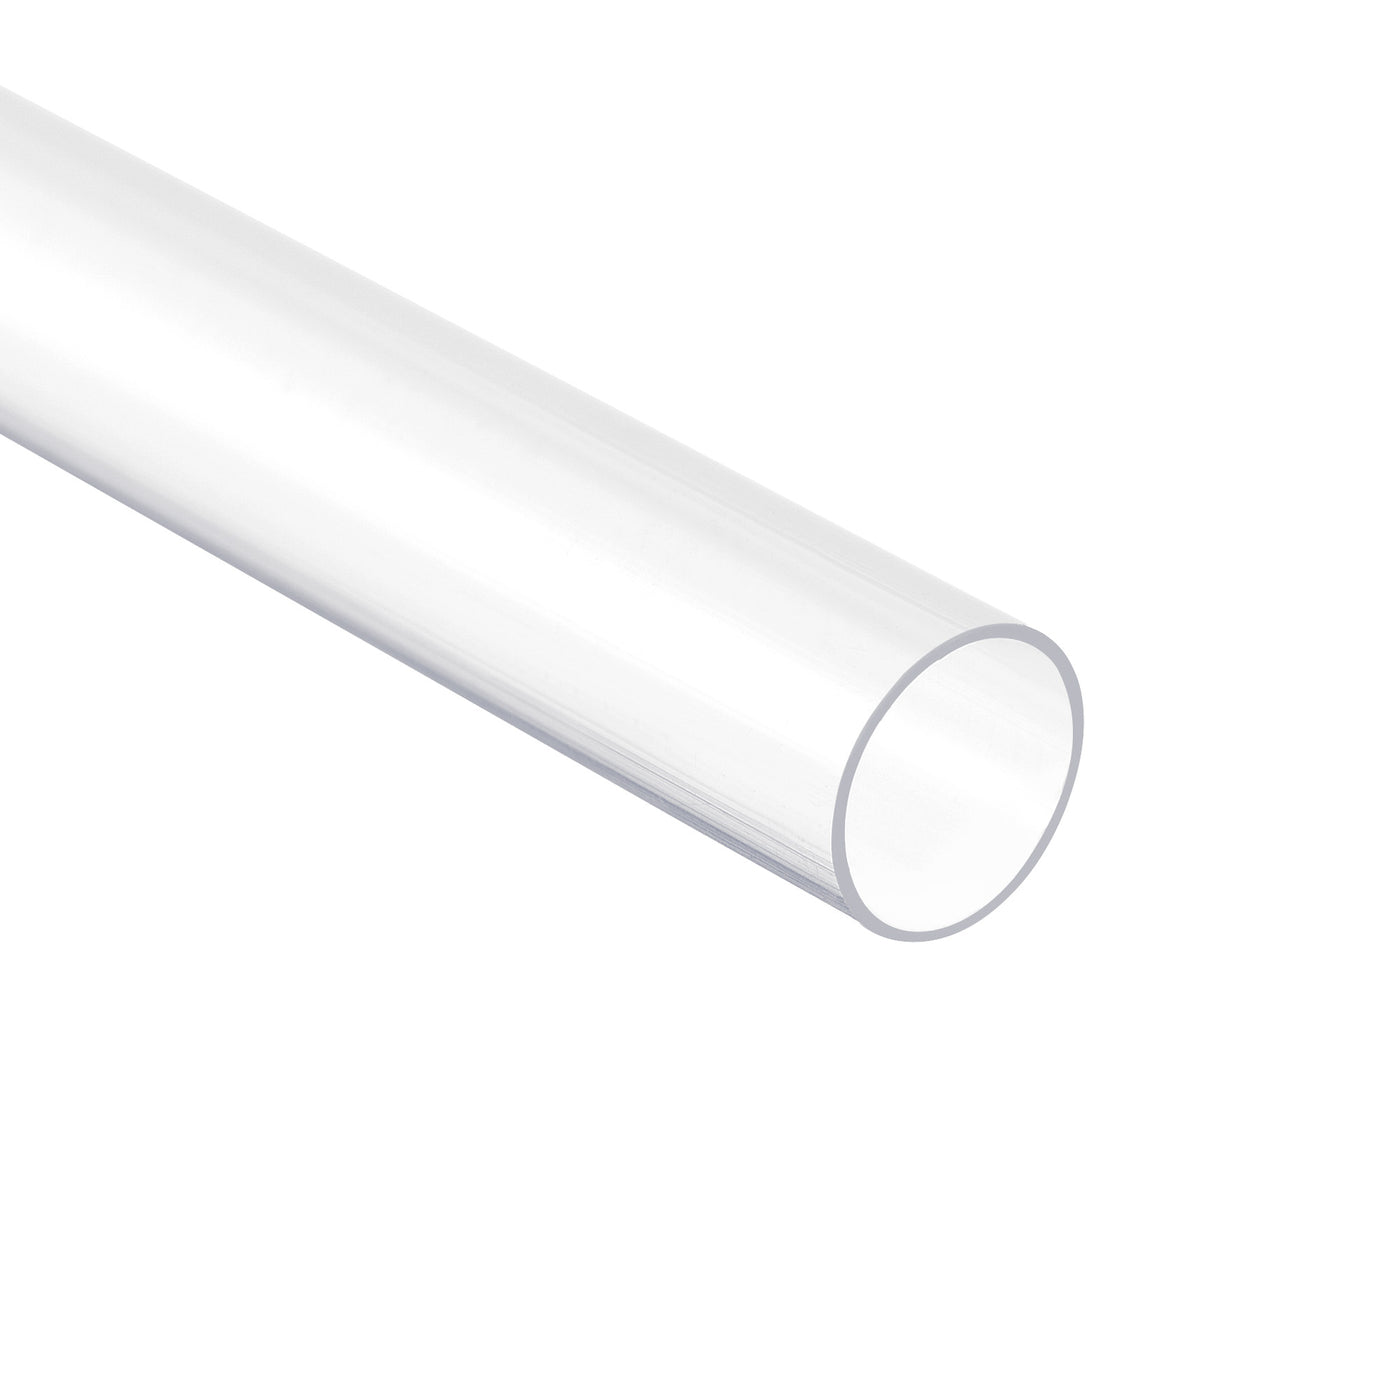 uxcell Uxcell 2pcs Polycarbonate Rigid Round Clear Tubing 15mm(0.6 Inch)IDx16mm(0.63 Inch)ODx225mm(8.8 Inch) Length Plastic Storage Transparent Tube with White Lids